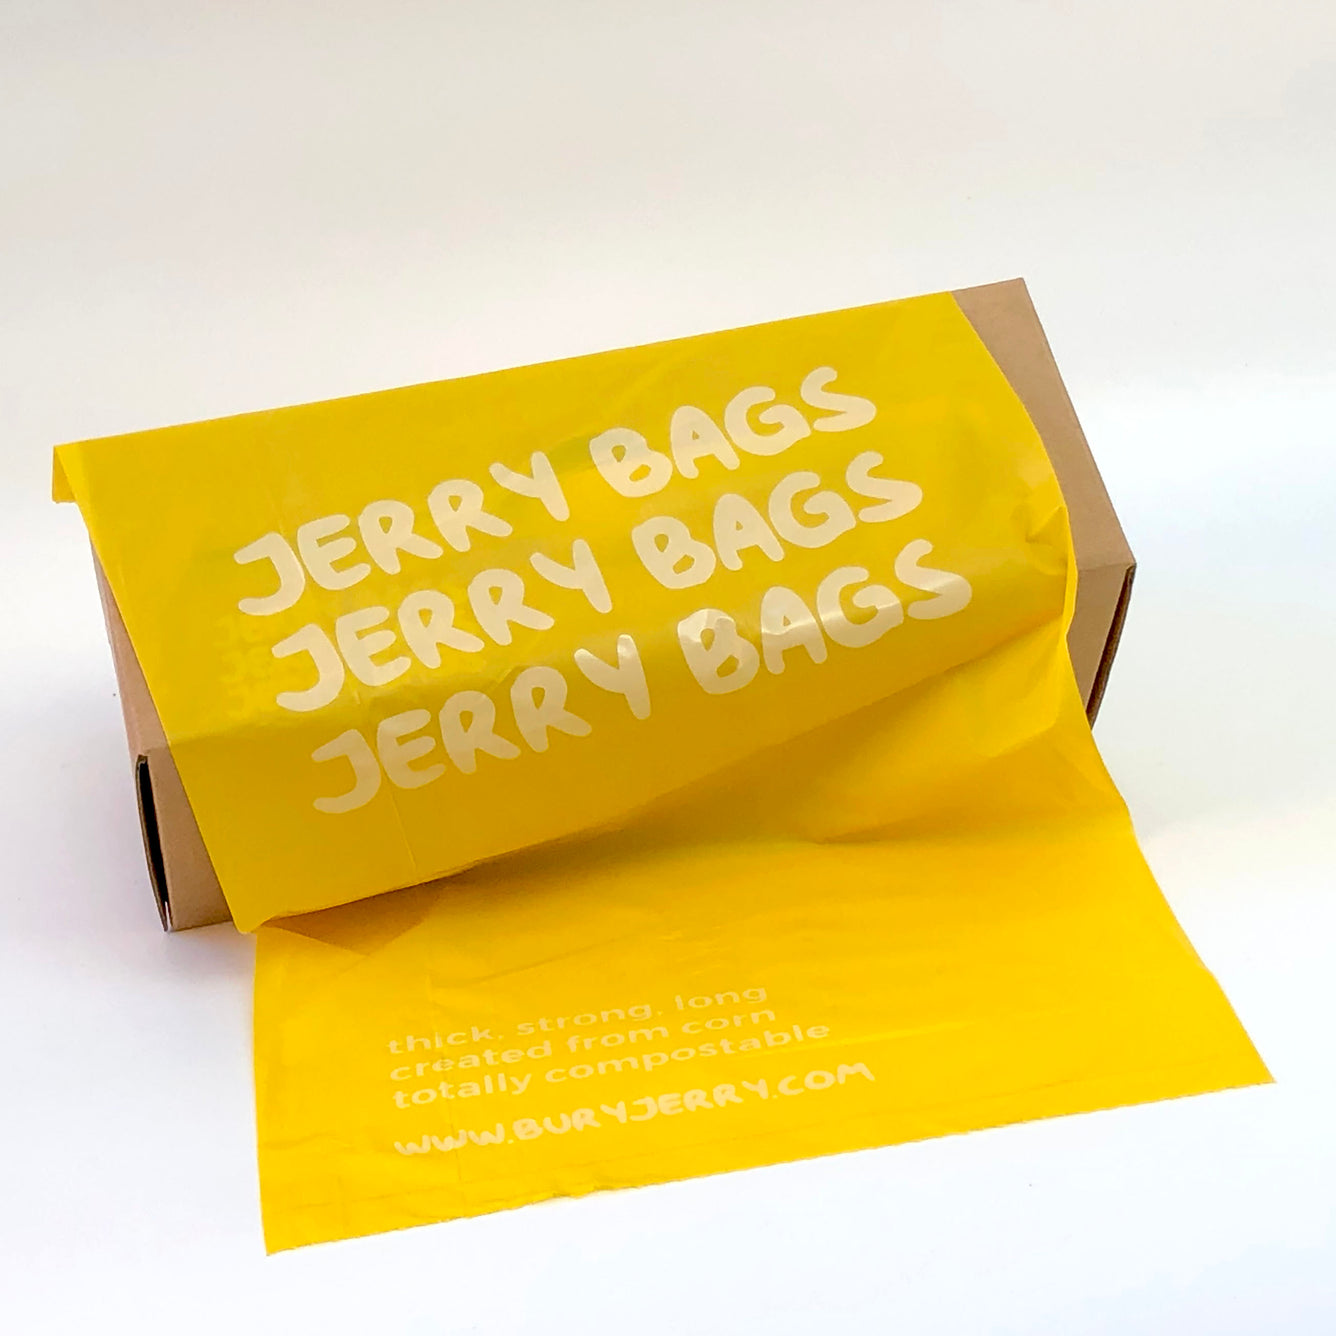 Jerry Bags Yellow Doggy Poop Bag dog poop bags compostable biodegradable kitty litter bag